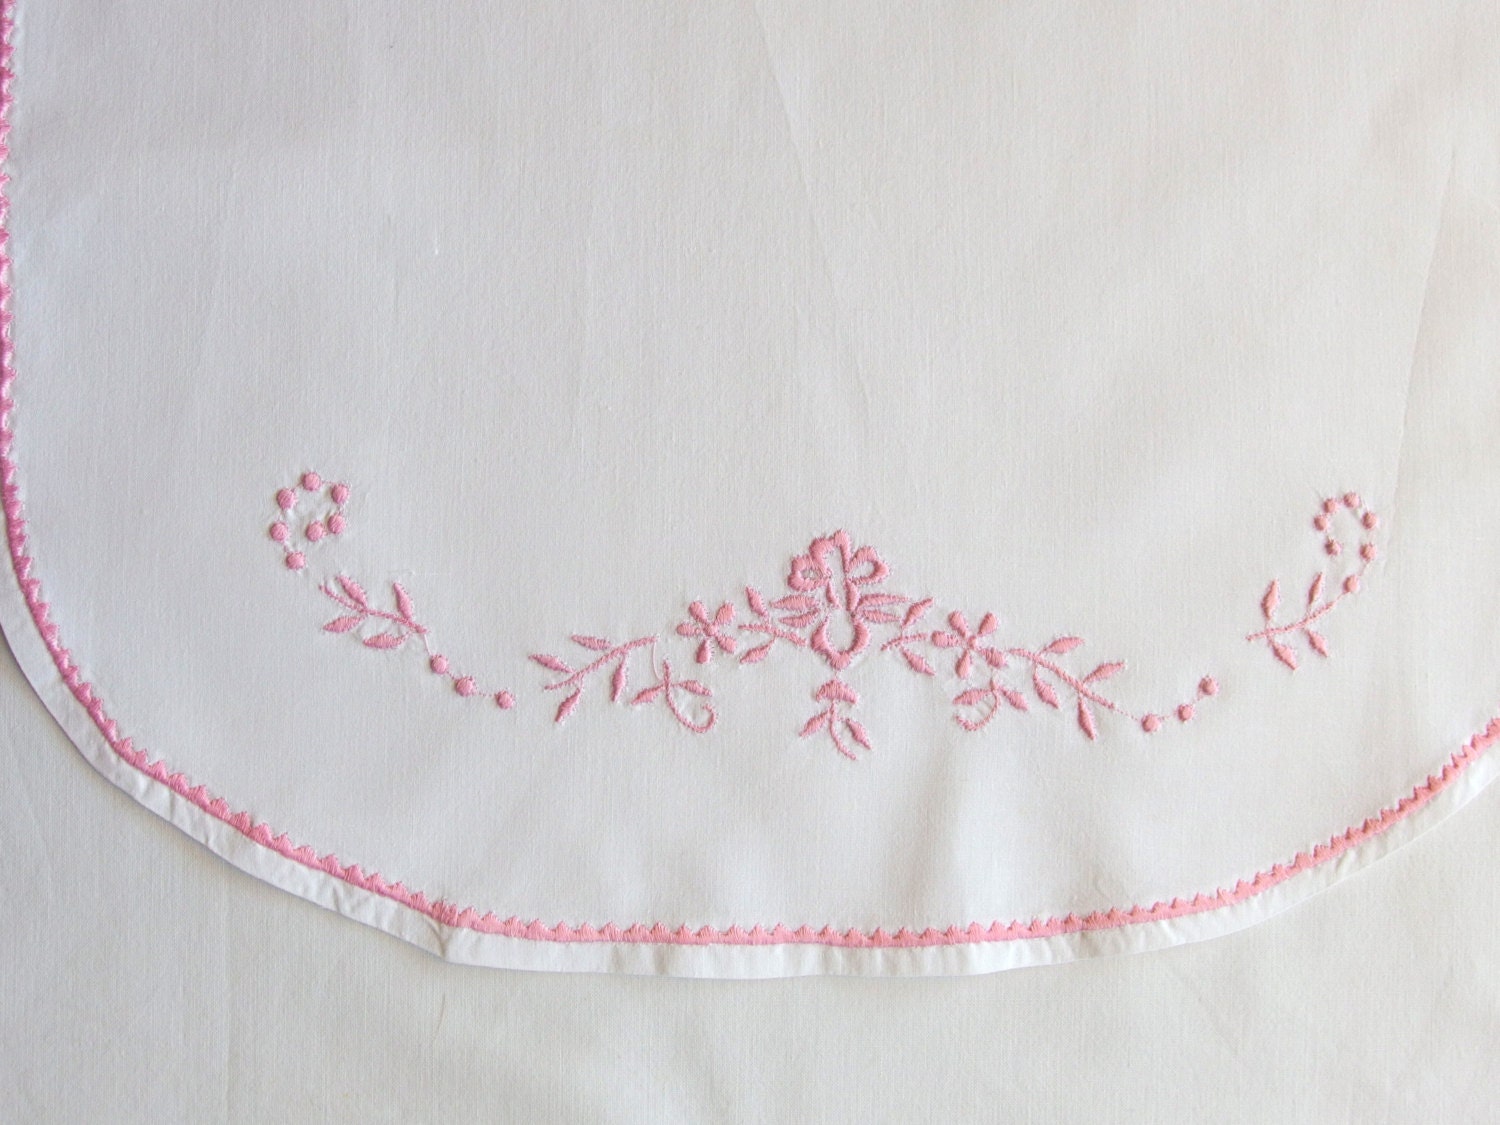 Vintage Oval Table Runner White Pink by VintageHomeStories on Etsy